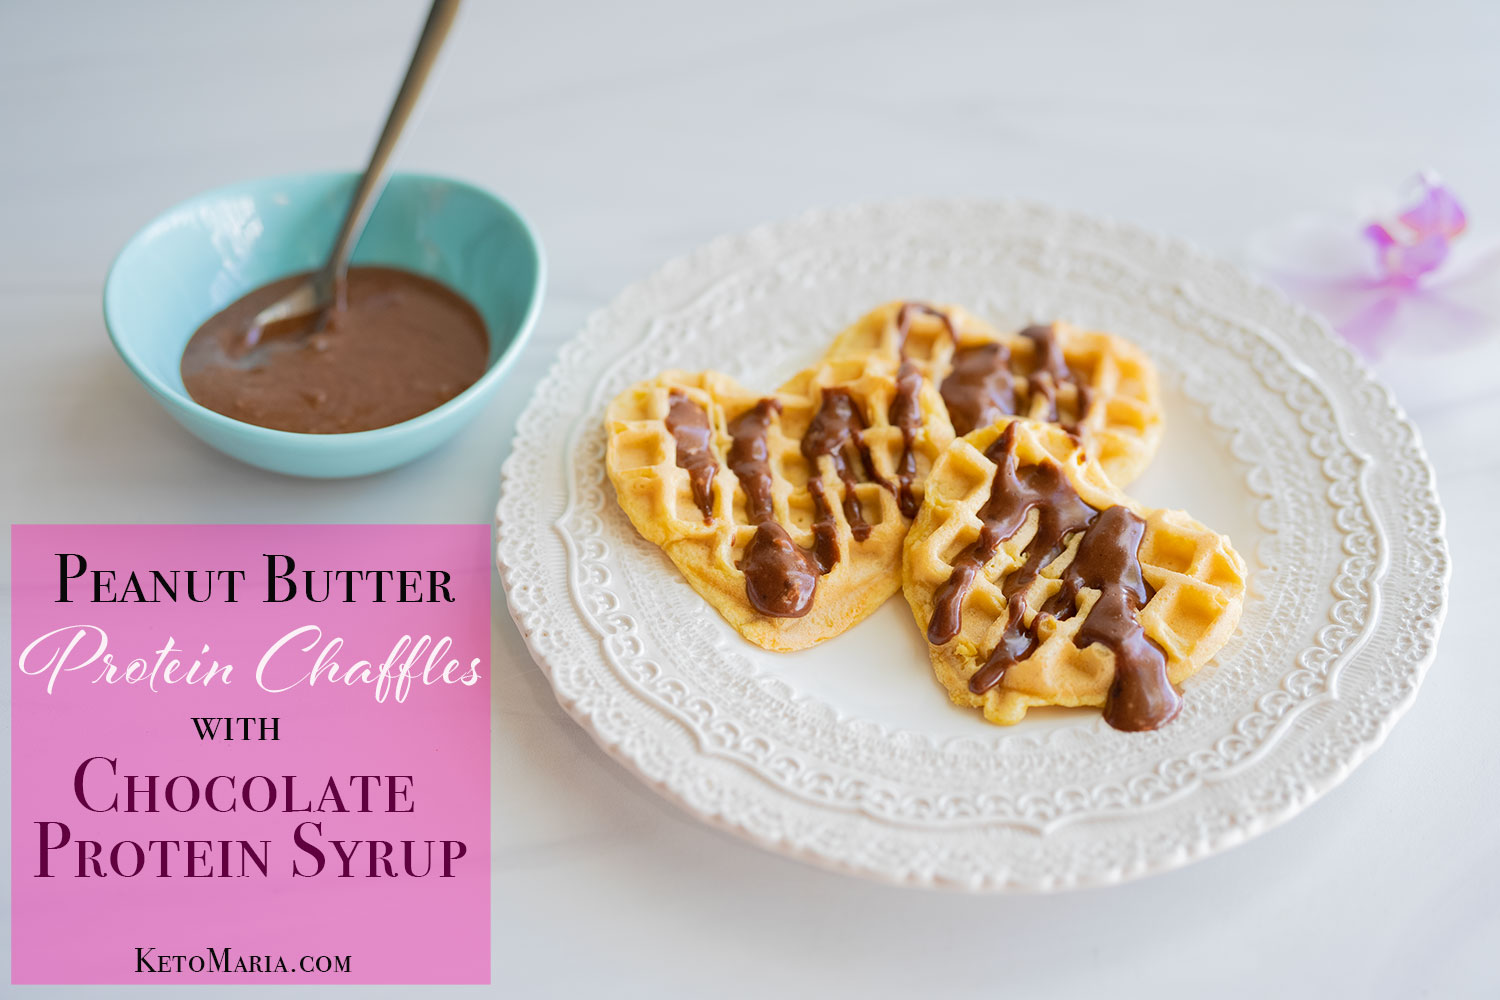 http://mariamindbodyhealth.com/wp-content/uploads/2023/04/peanut-butter-protein-chaffles-with-chocolate-protein-syrup.jpg